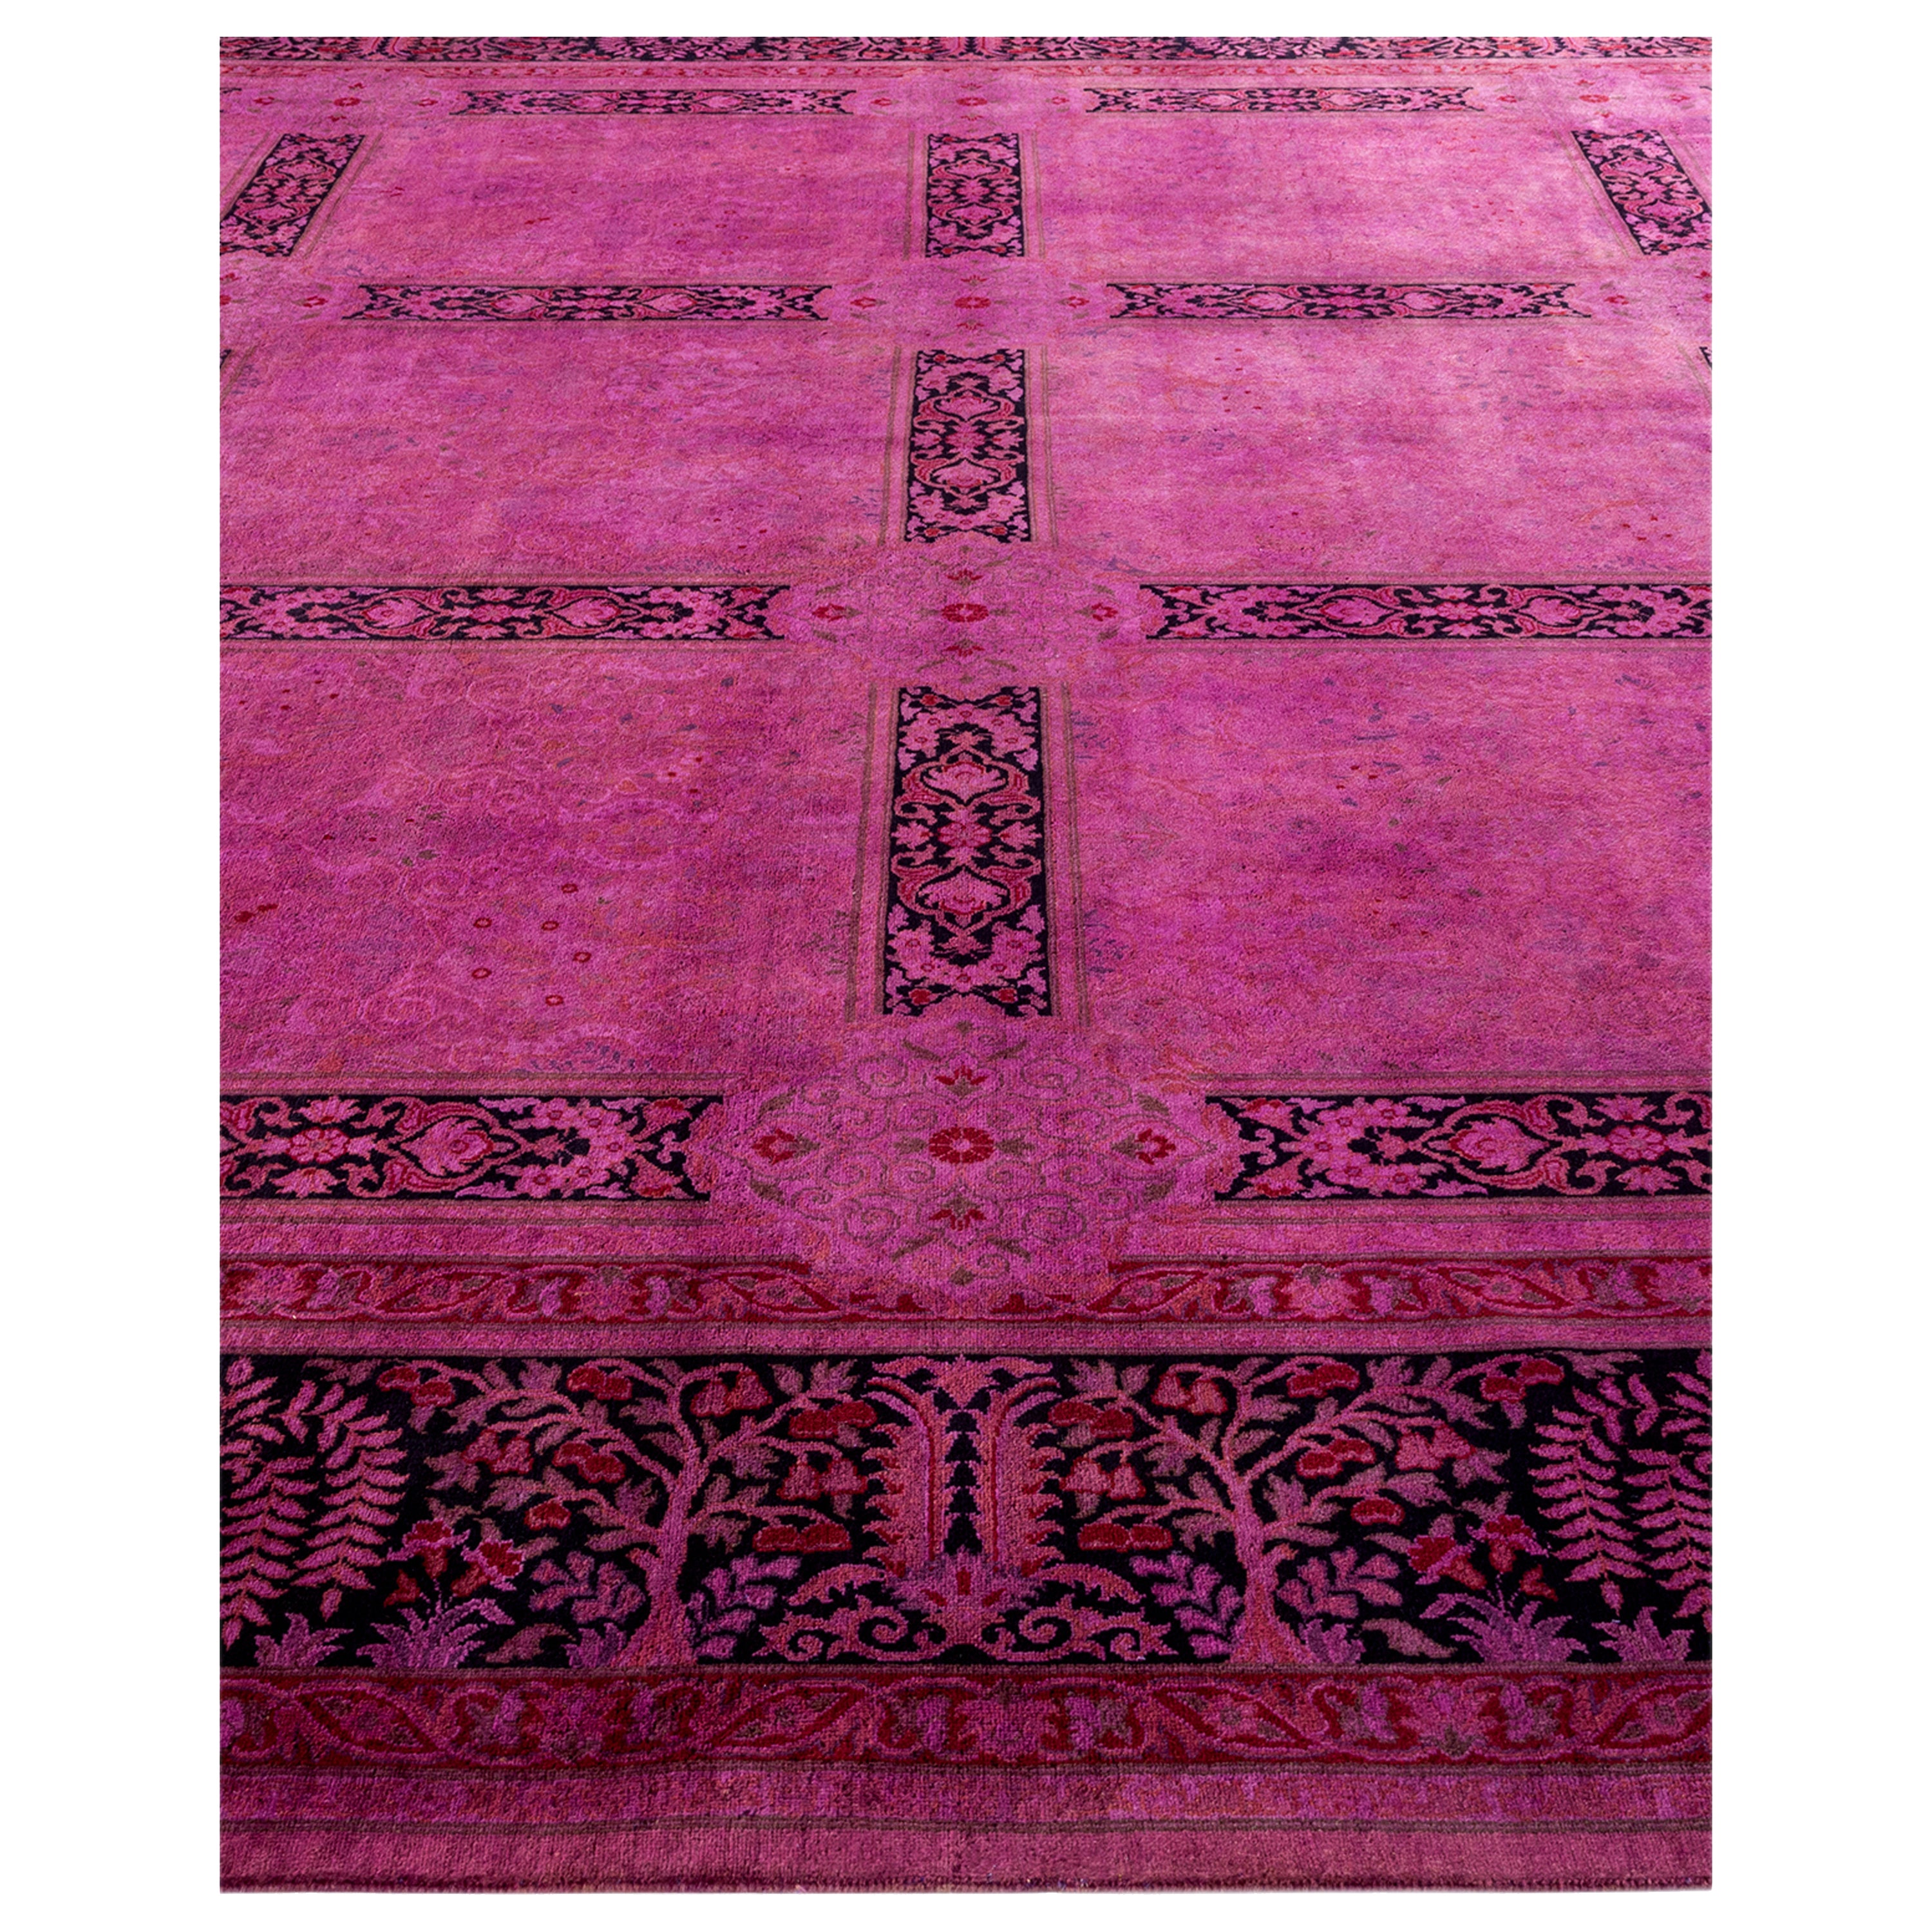 Pink Overdyed Wool Rug - 10' 3" x 13' 10"